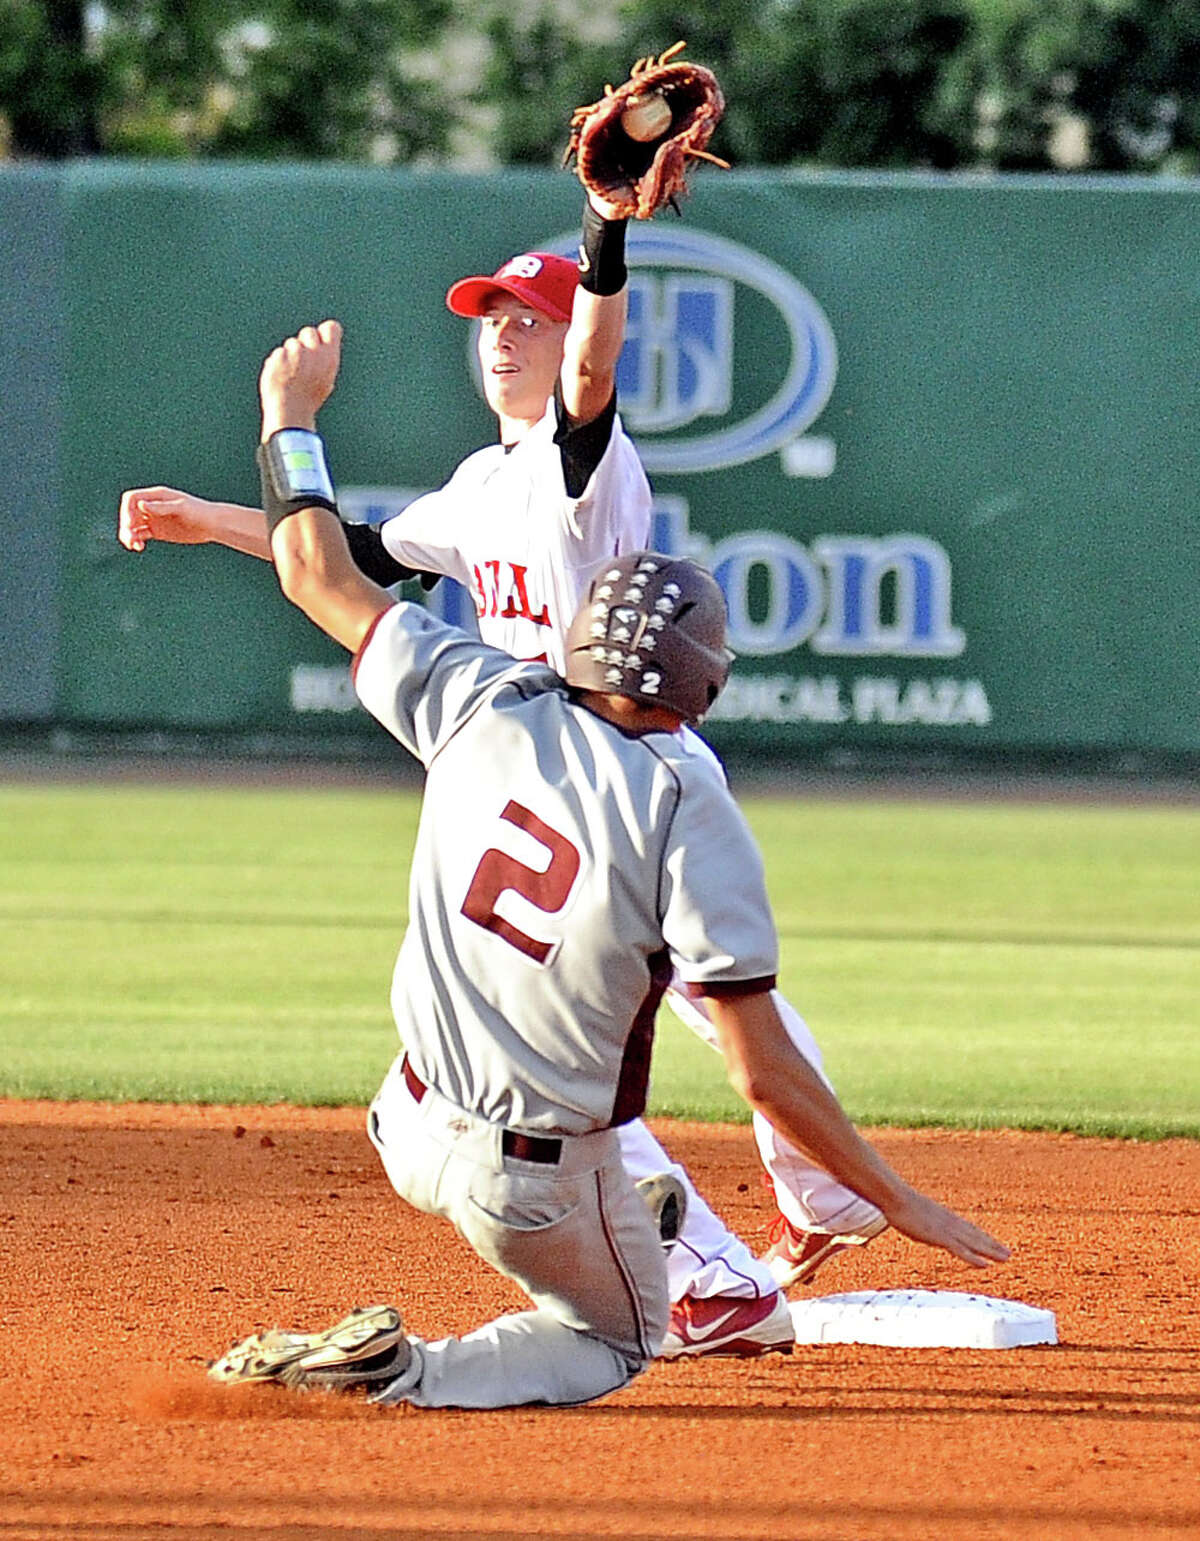 Silsbee pinch runner Kris Elers, #, is thrown out at second during the Silsbee High School district baseball game against Diboll High School at the University of Houston on Thursday, May 30, 2013. Photo taken: Randy Edwards/The Enterprise